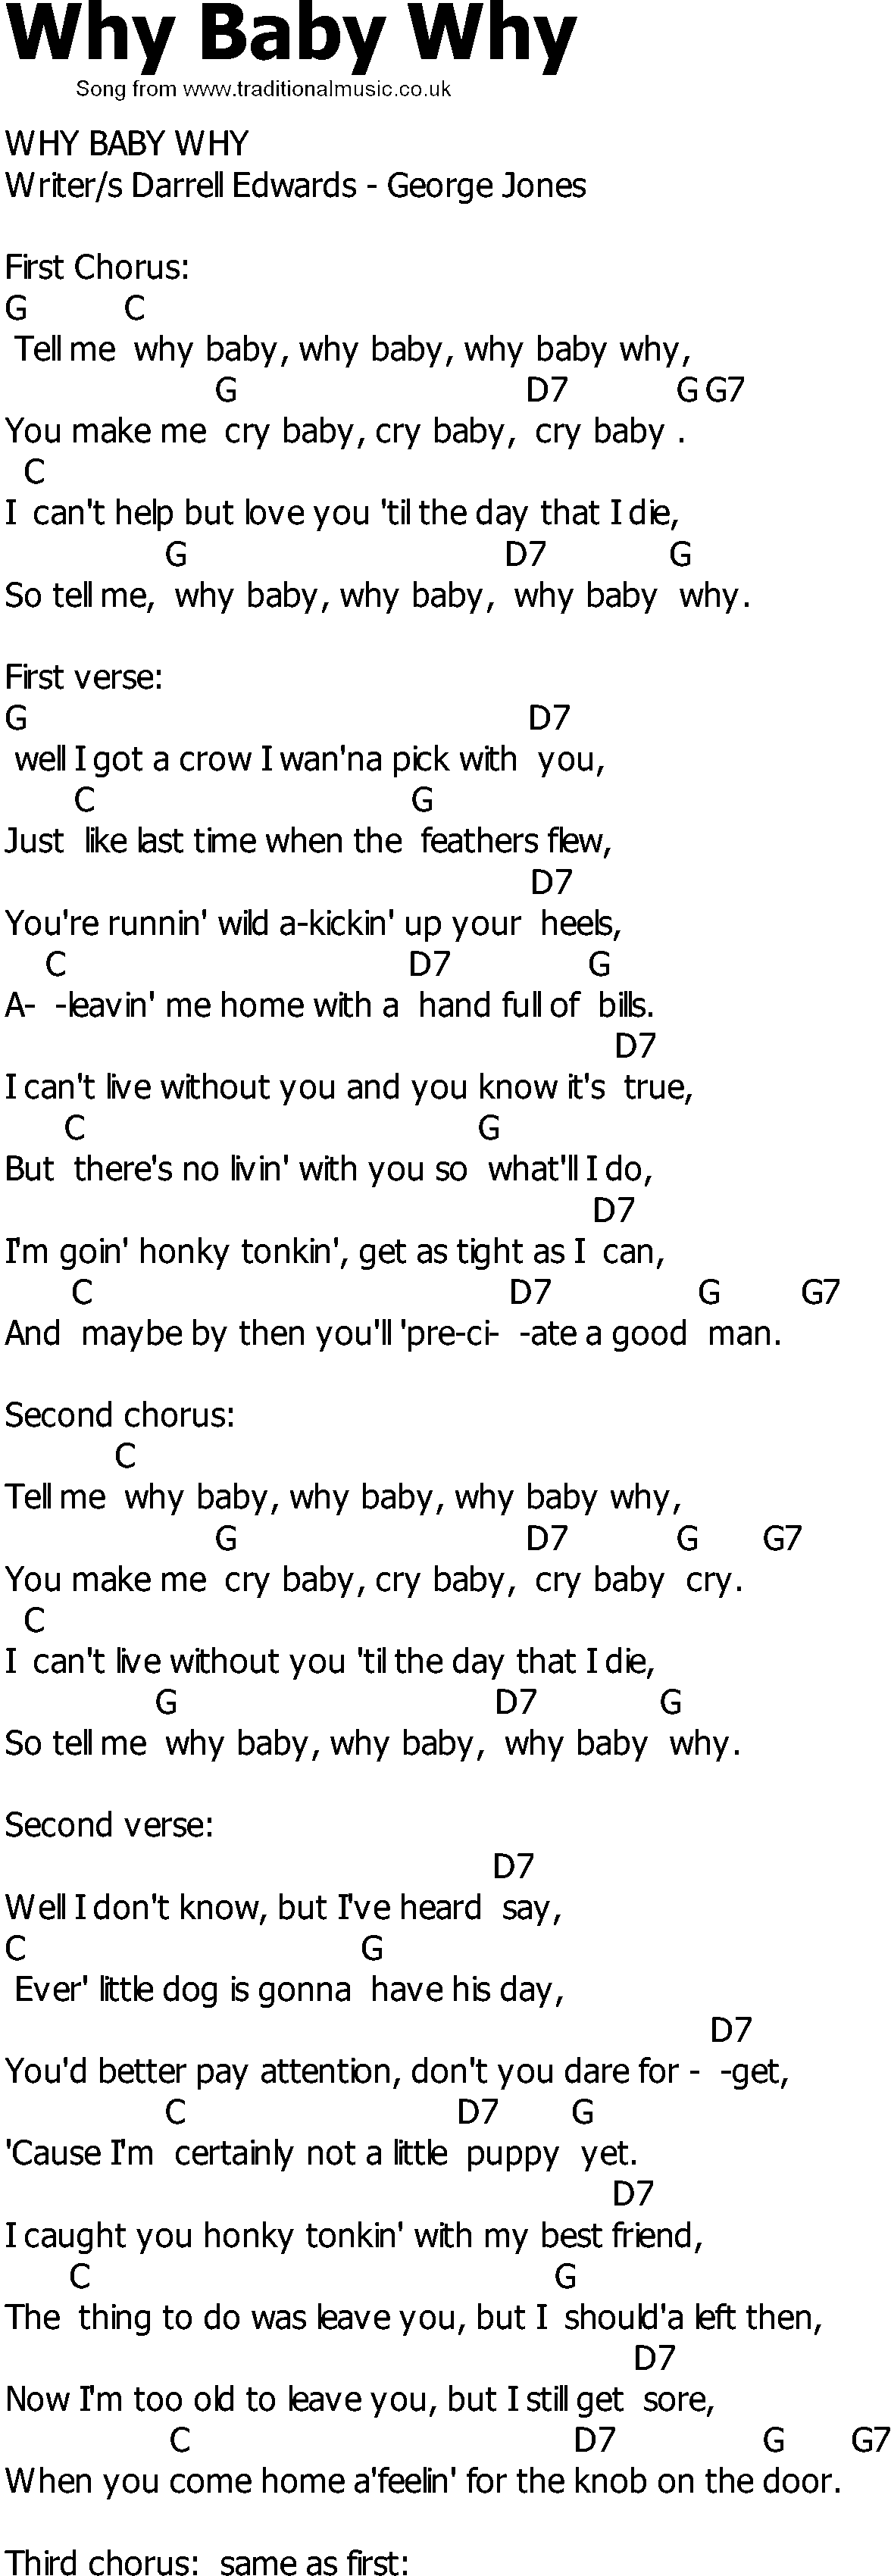 Old Country song lyrics with chords - Why Baby Why